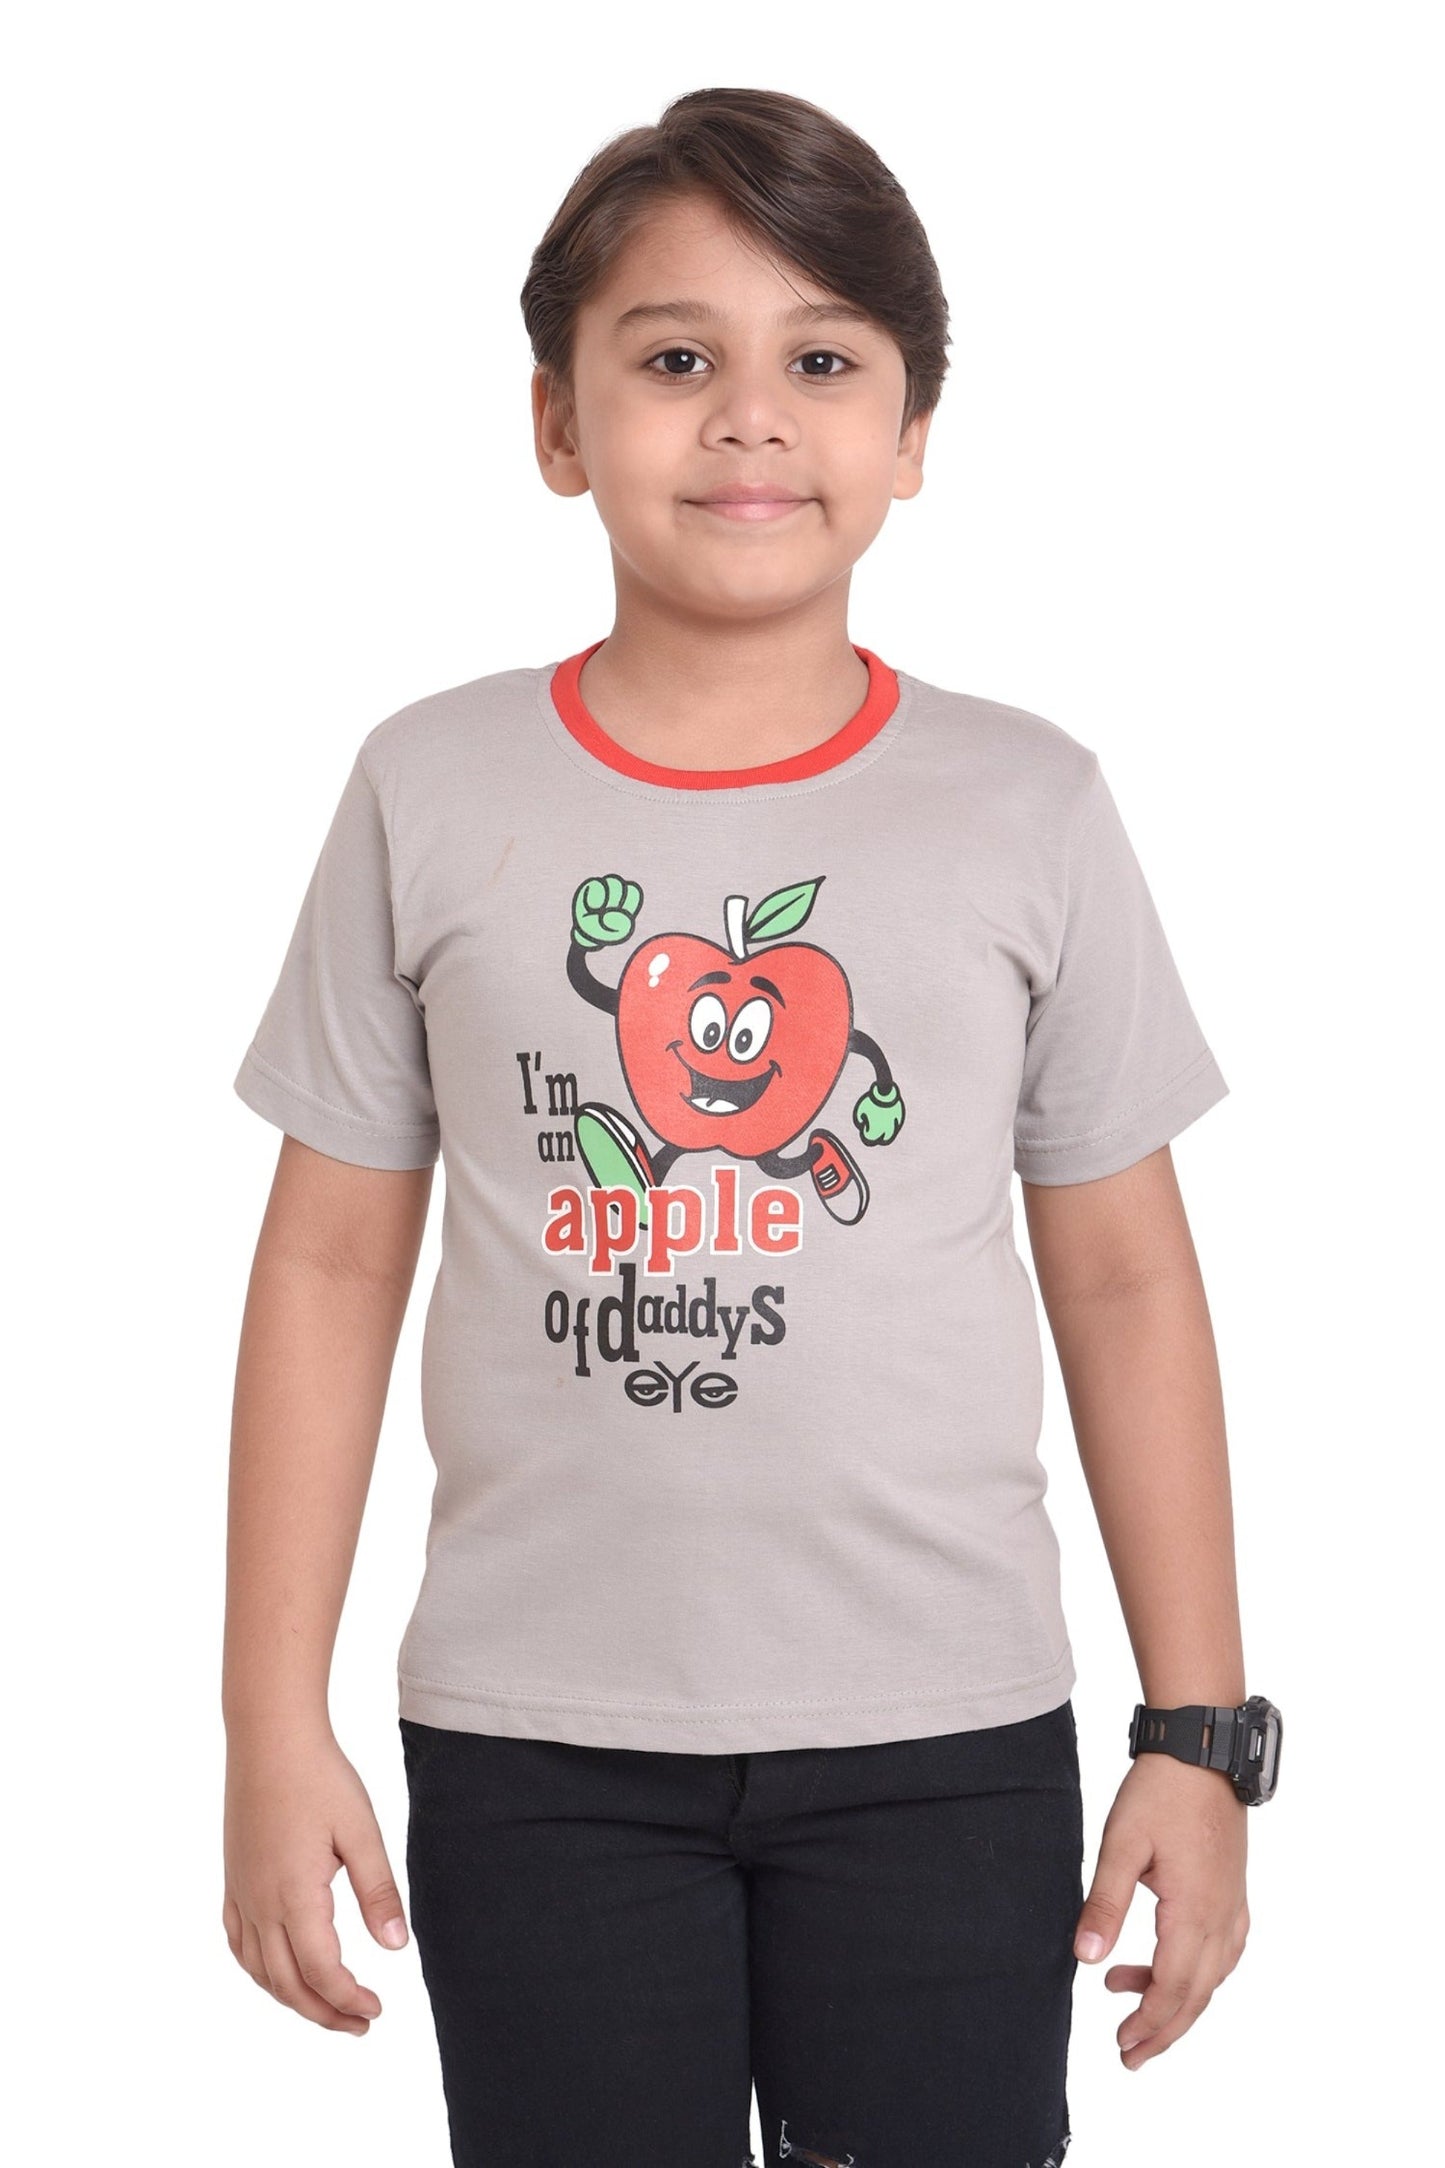 Kids Unisex Round Neck Printed Cotton T-shirt with I'M AN APPLE OF DADDY'S EYE print, front view